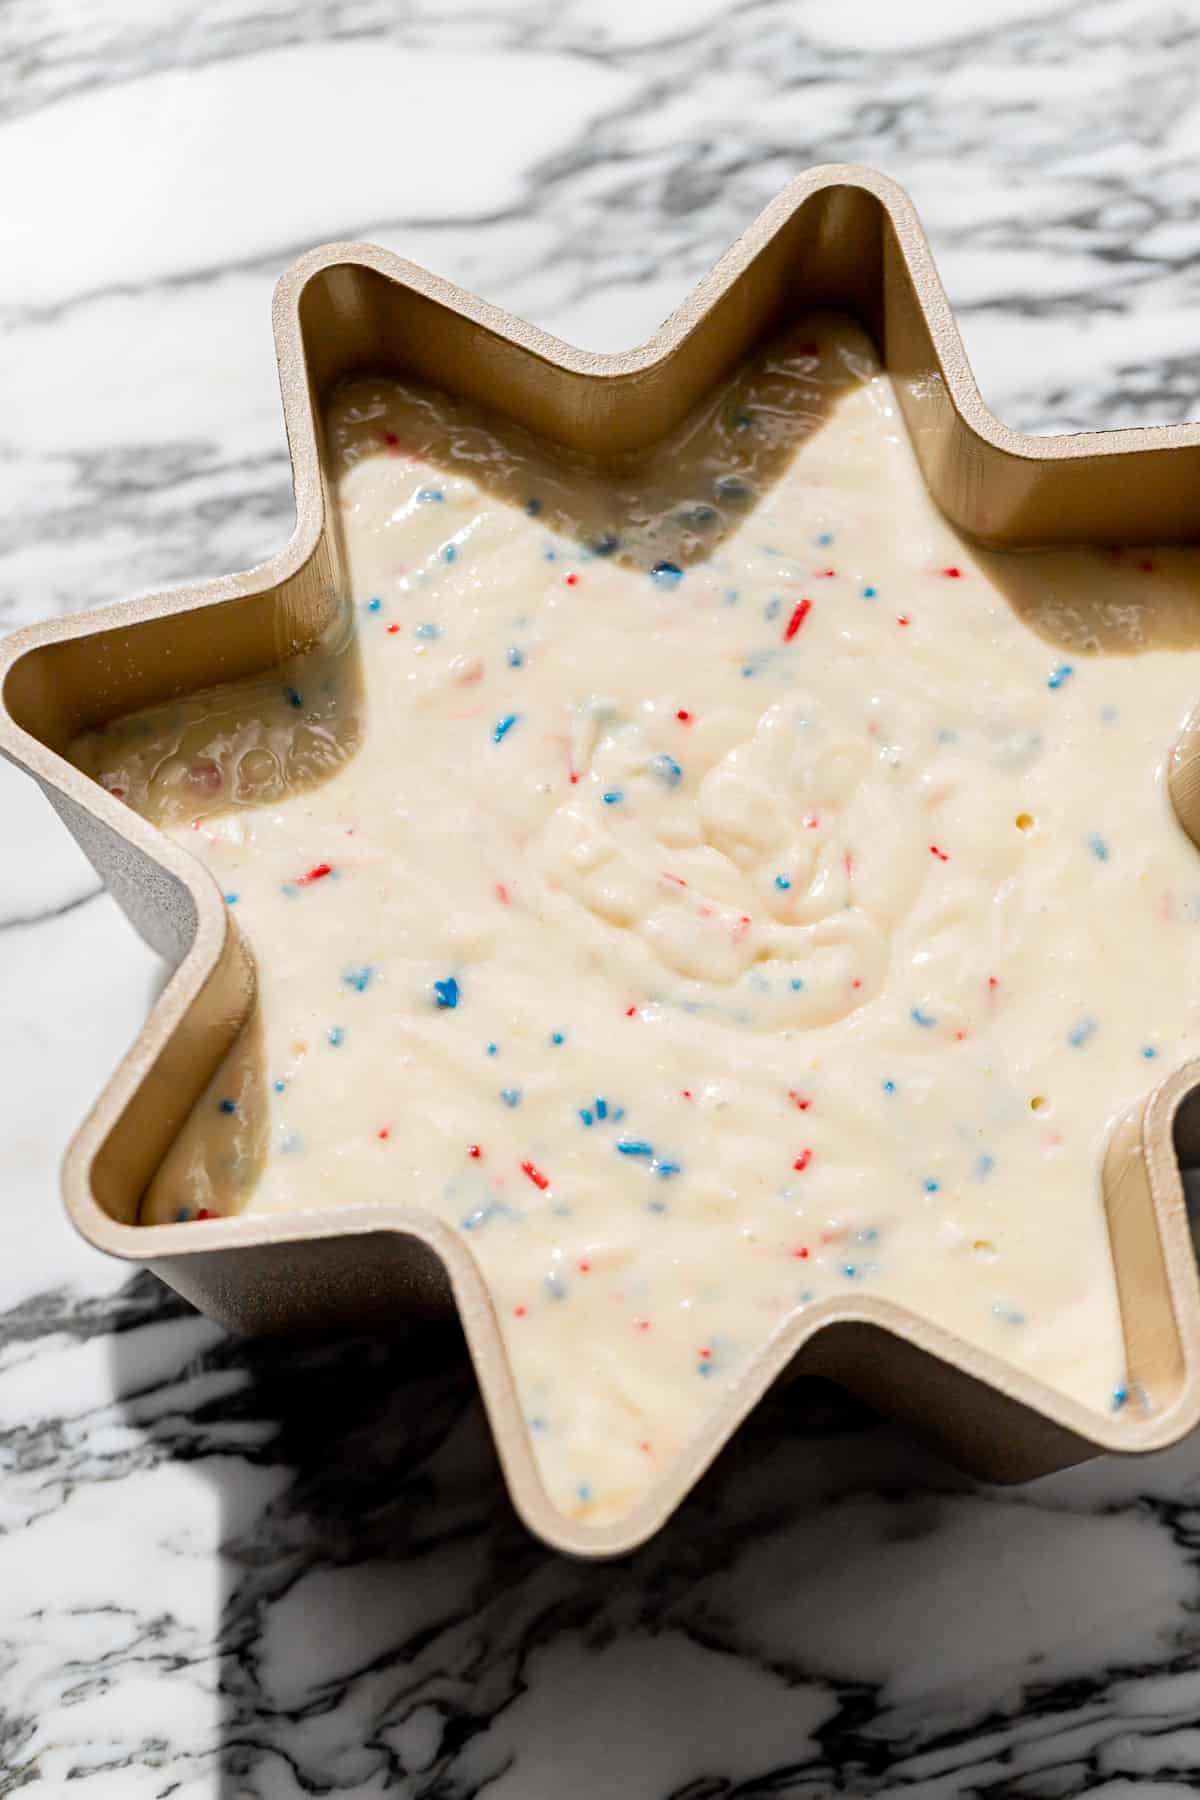 funfetti cake batter added to fluted pan.